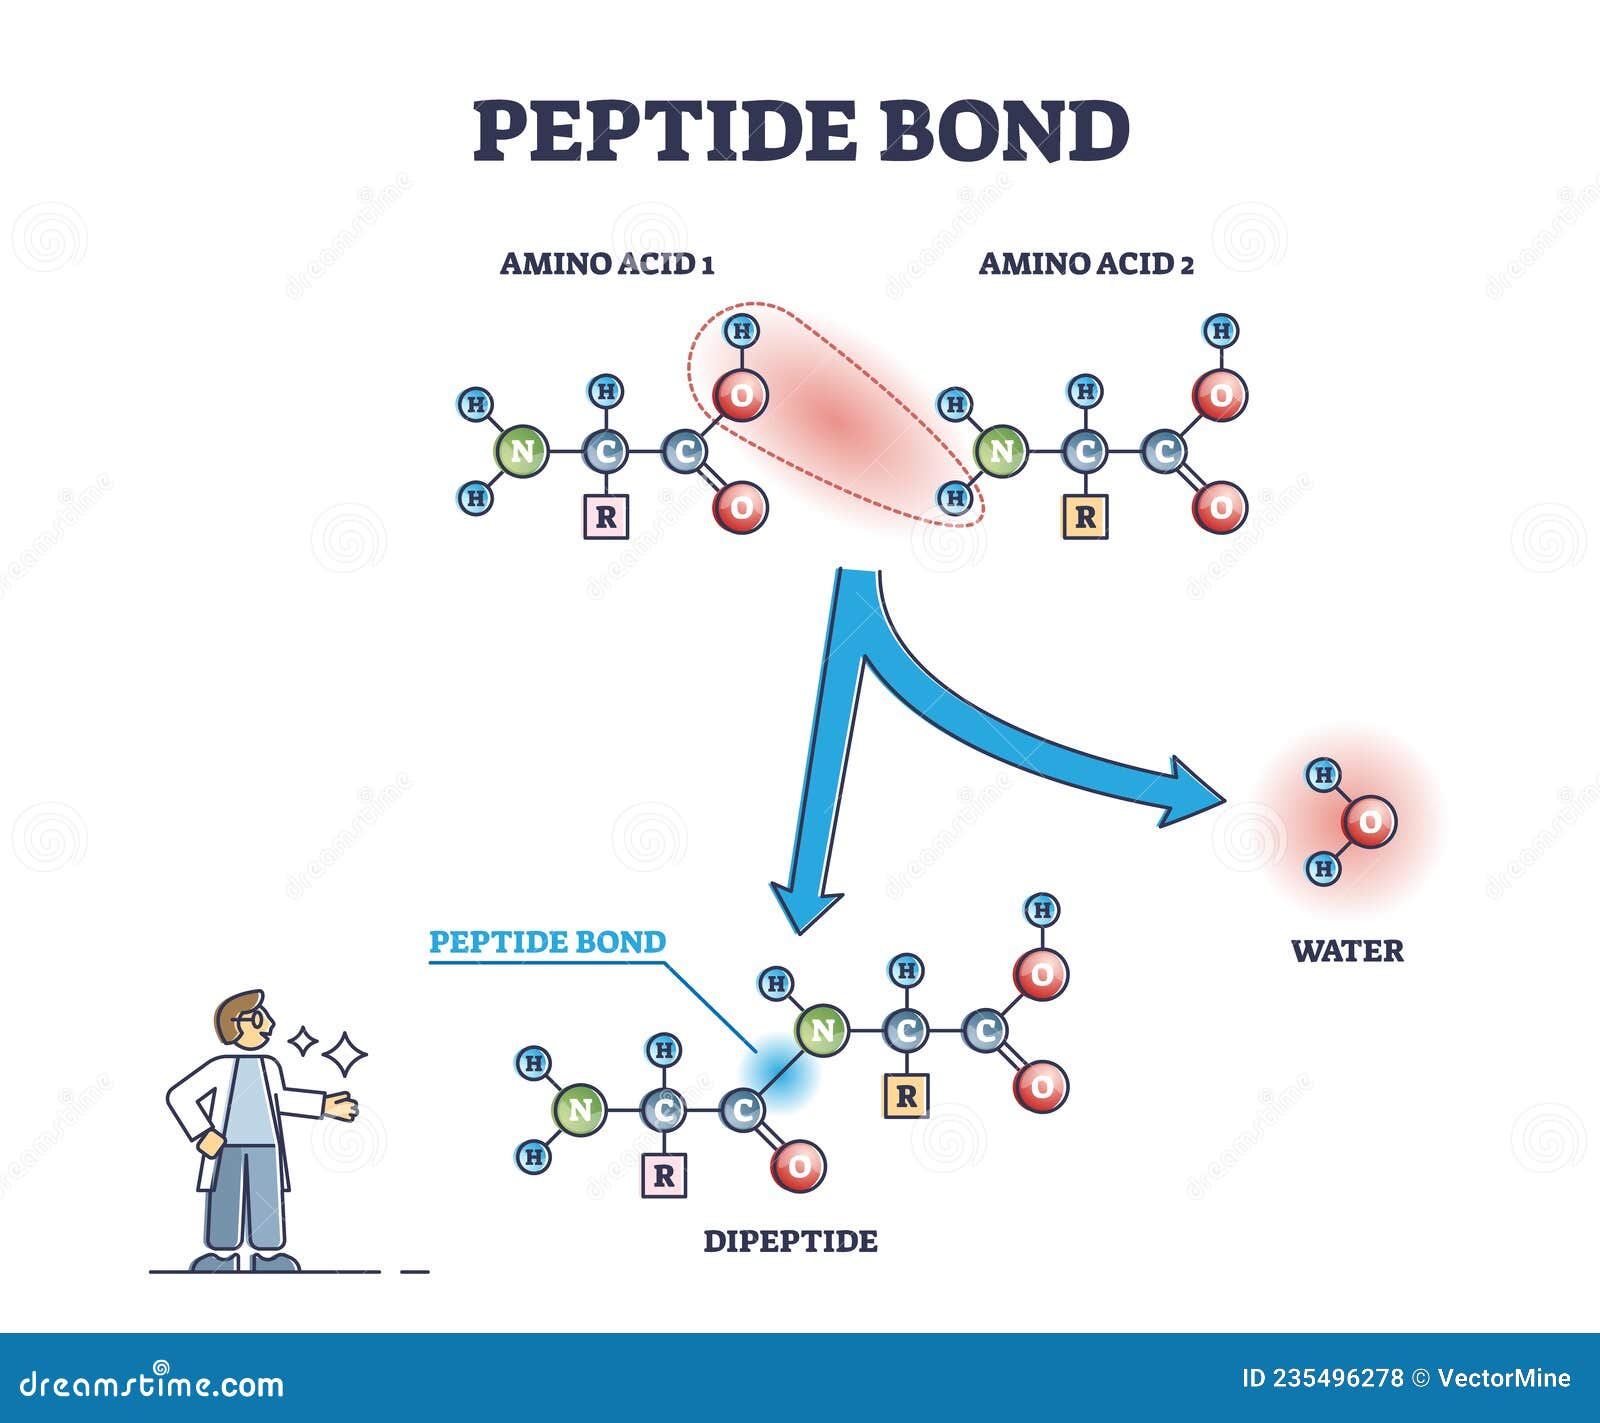 peptide bond as amino acids formation in protein reaction outline diagram